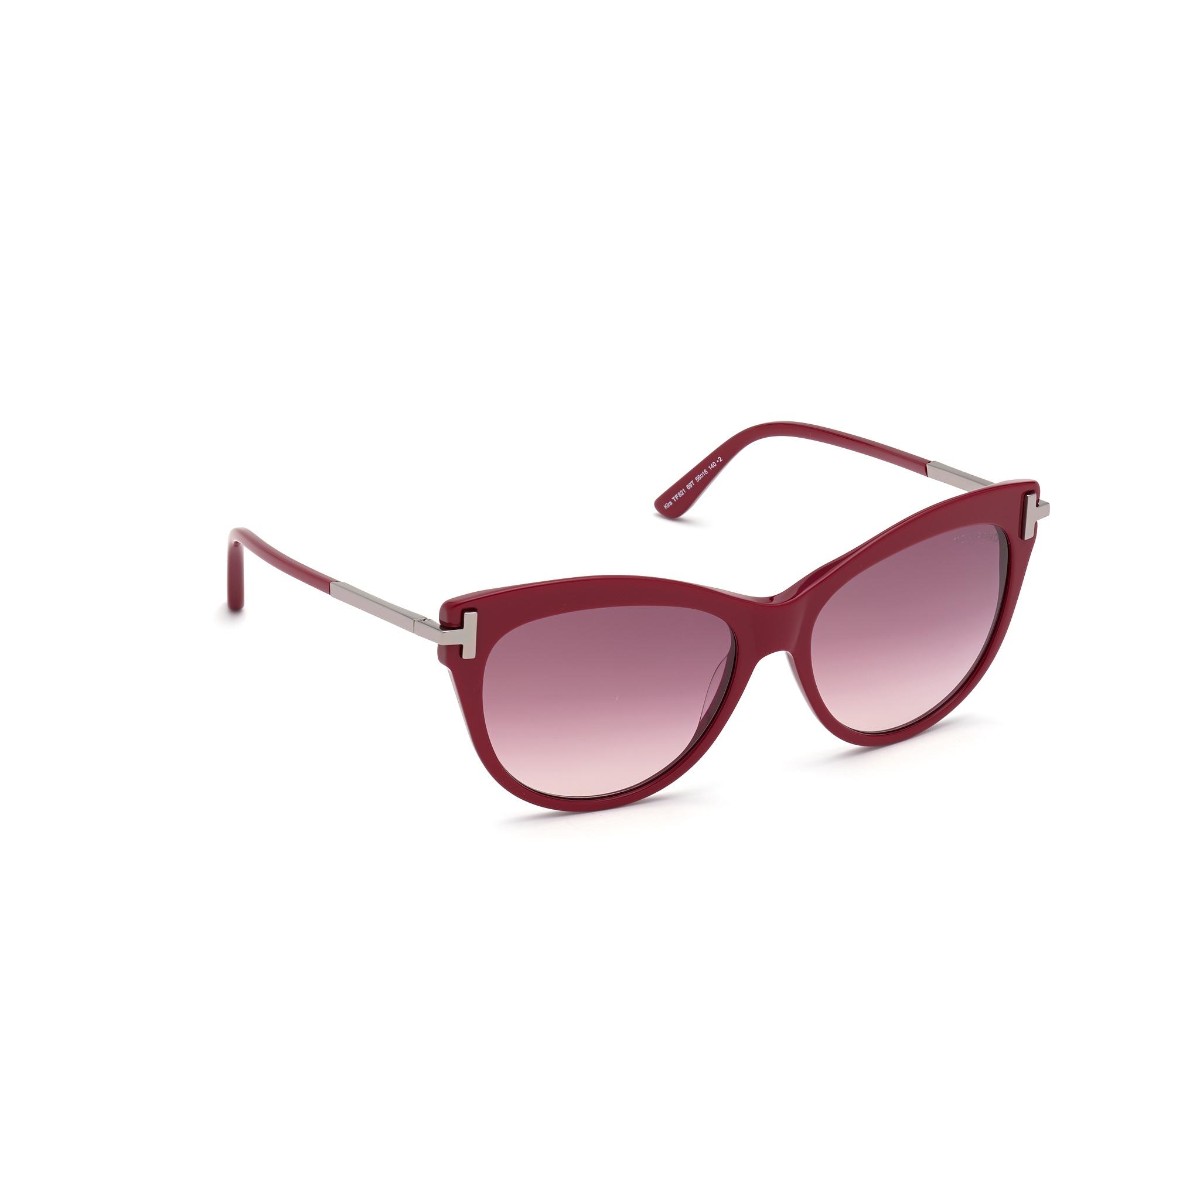 Tom Ford - TF821 69T Red/Silver